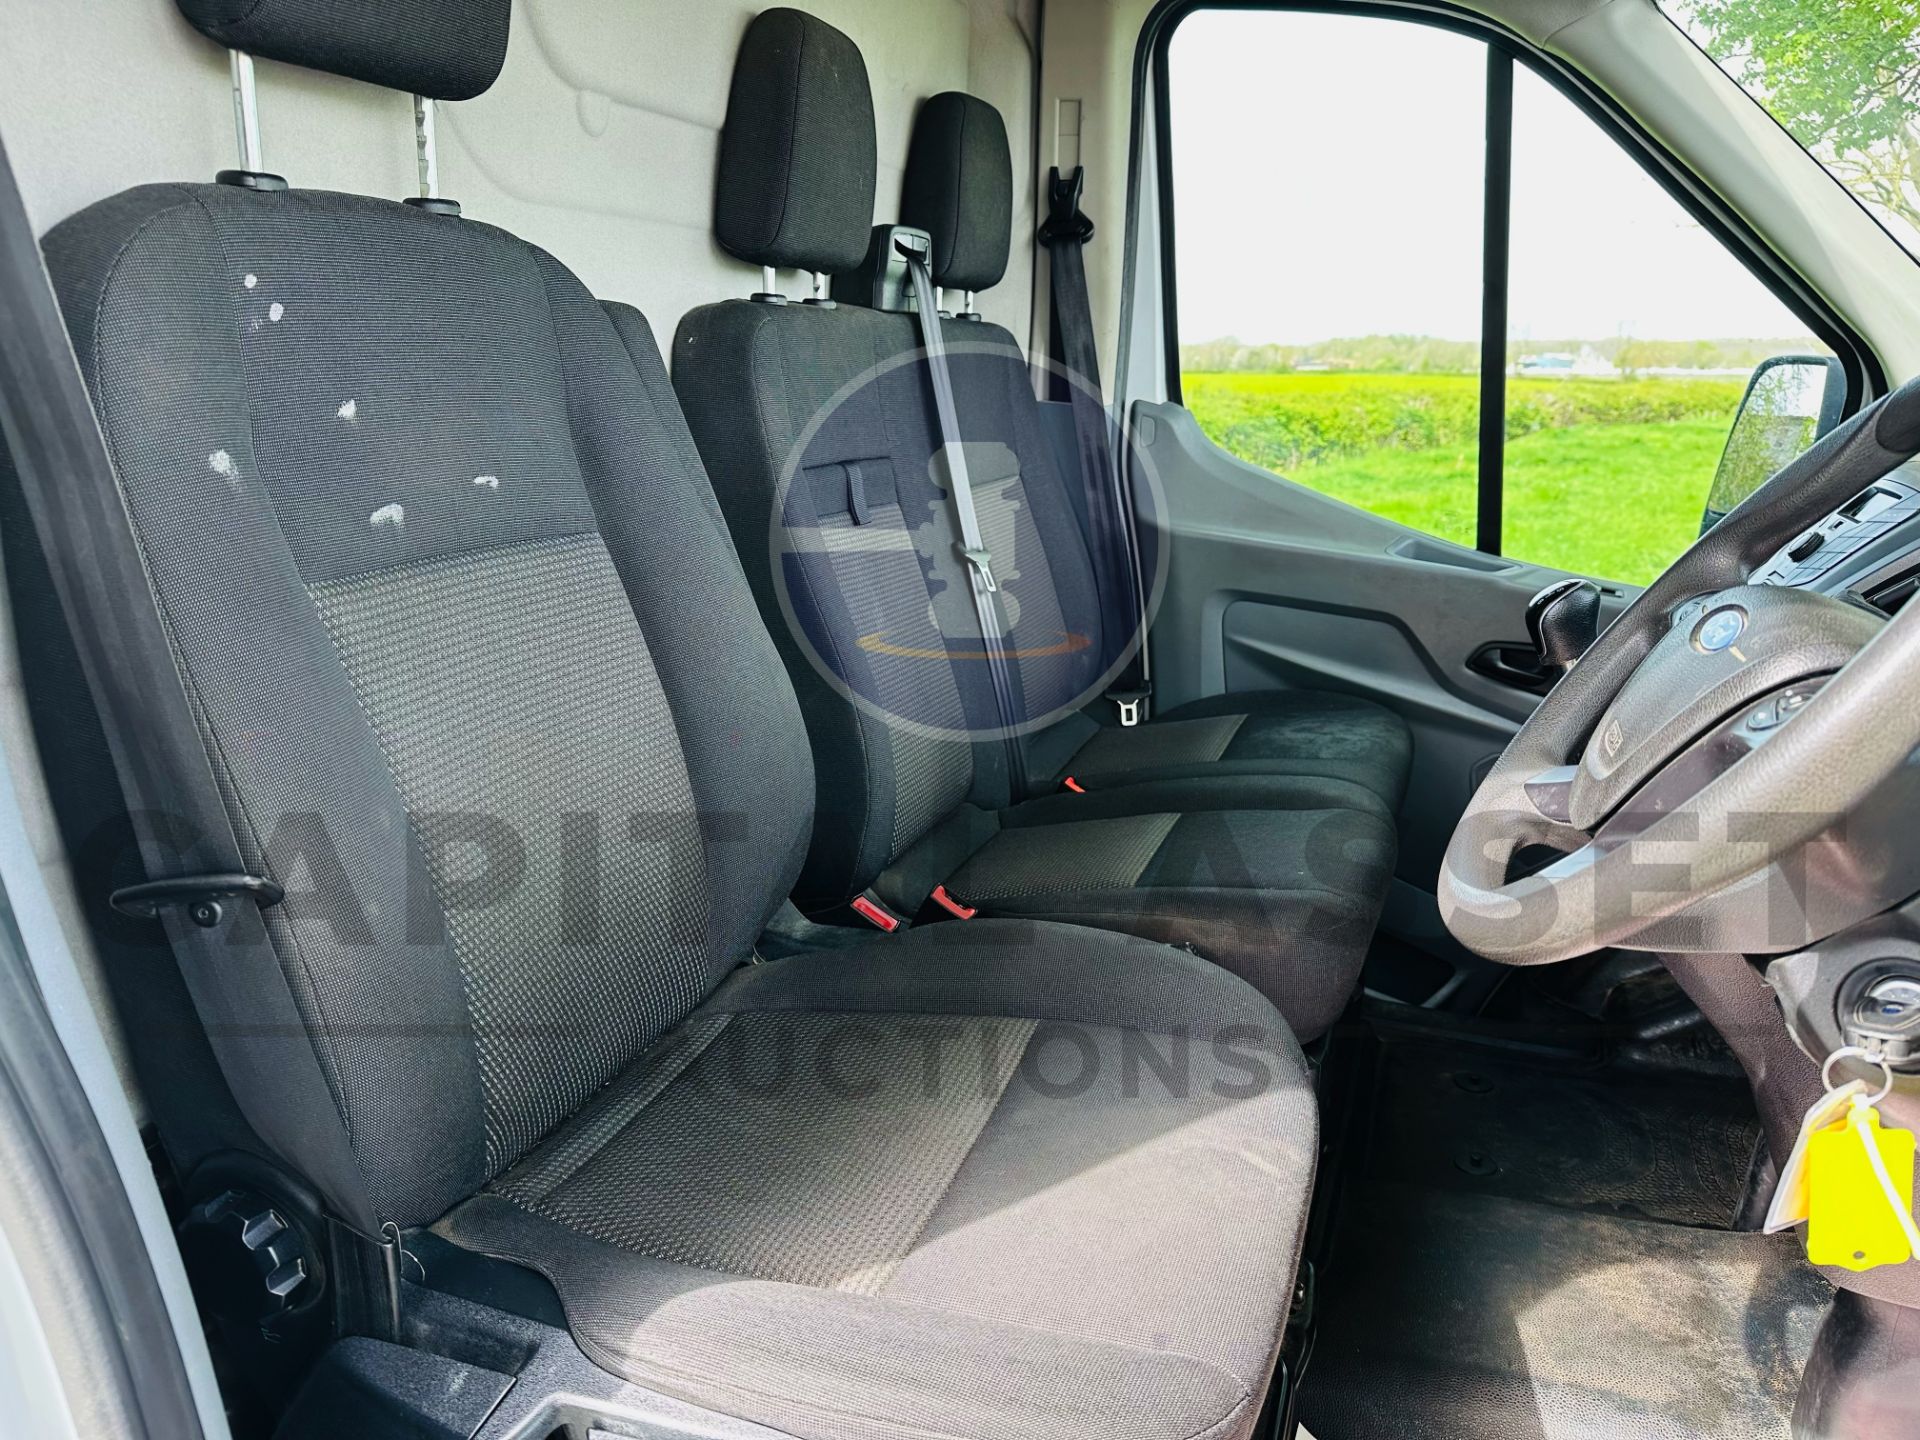 FORD TRANSIT 350 2.0 TDCI *ECOBLUE EDITION* LWB HIGH TOP - EURO 6 - 2019 MODEL - 1 OWNER - LOOK!!! - Image 22 of 32